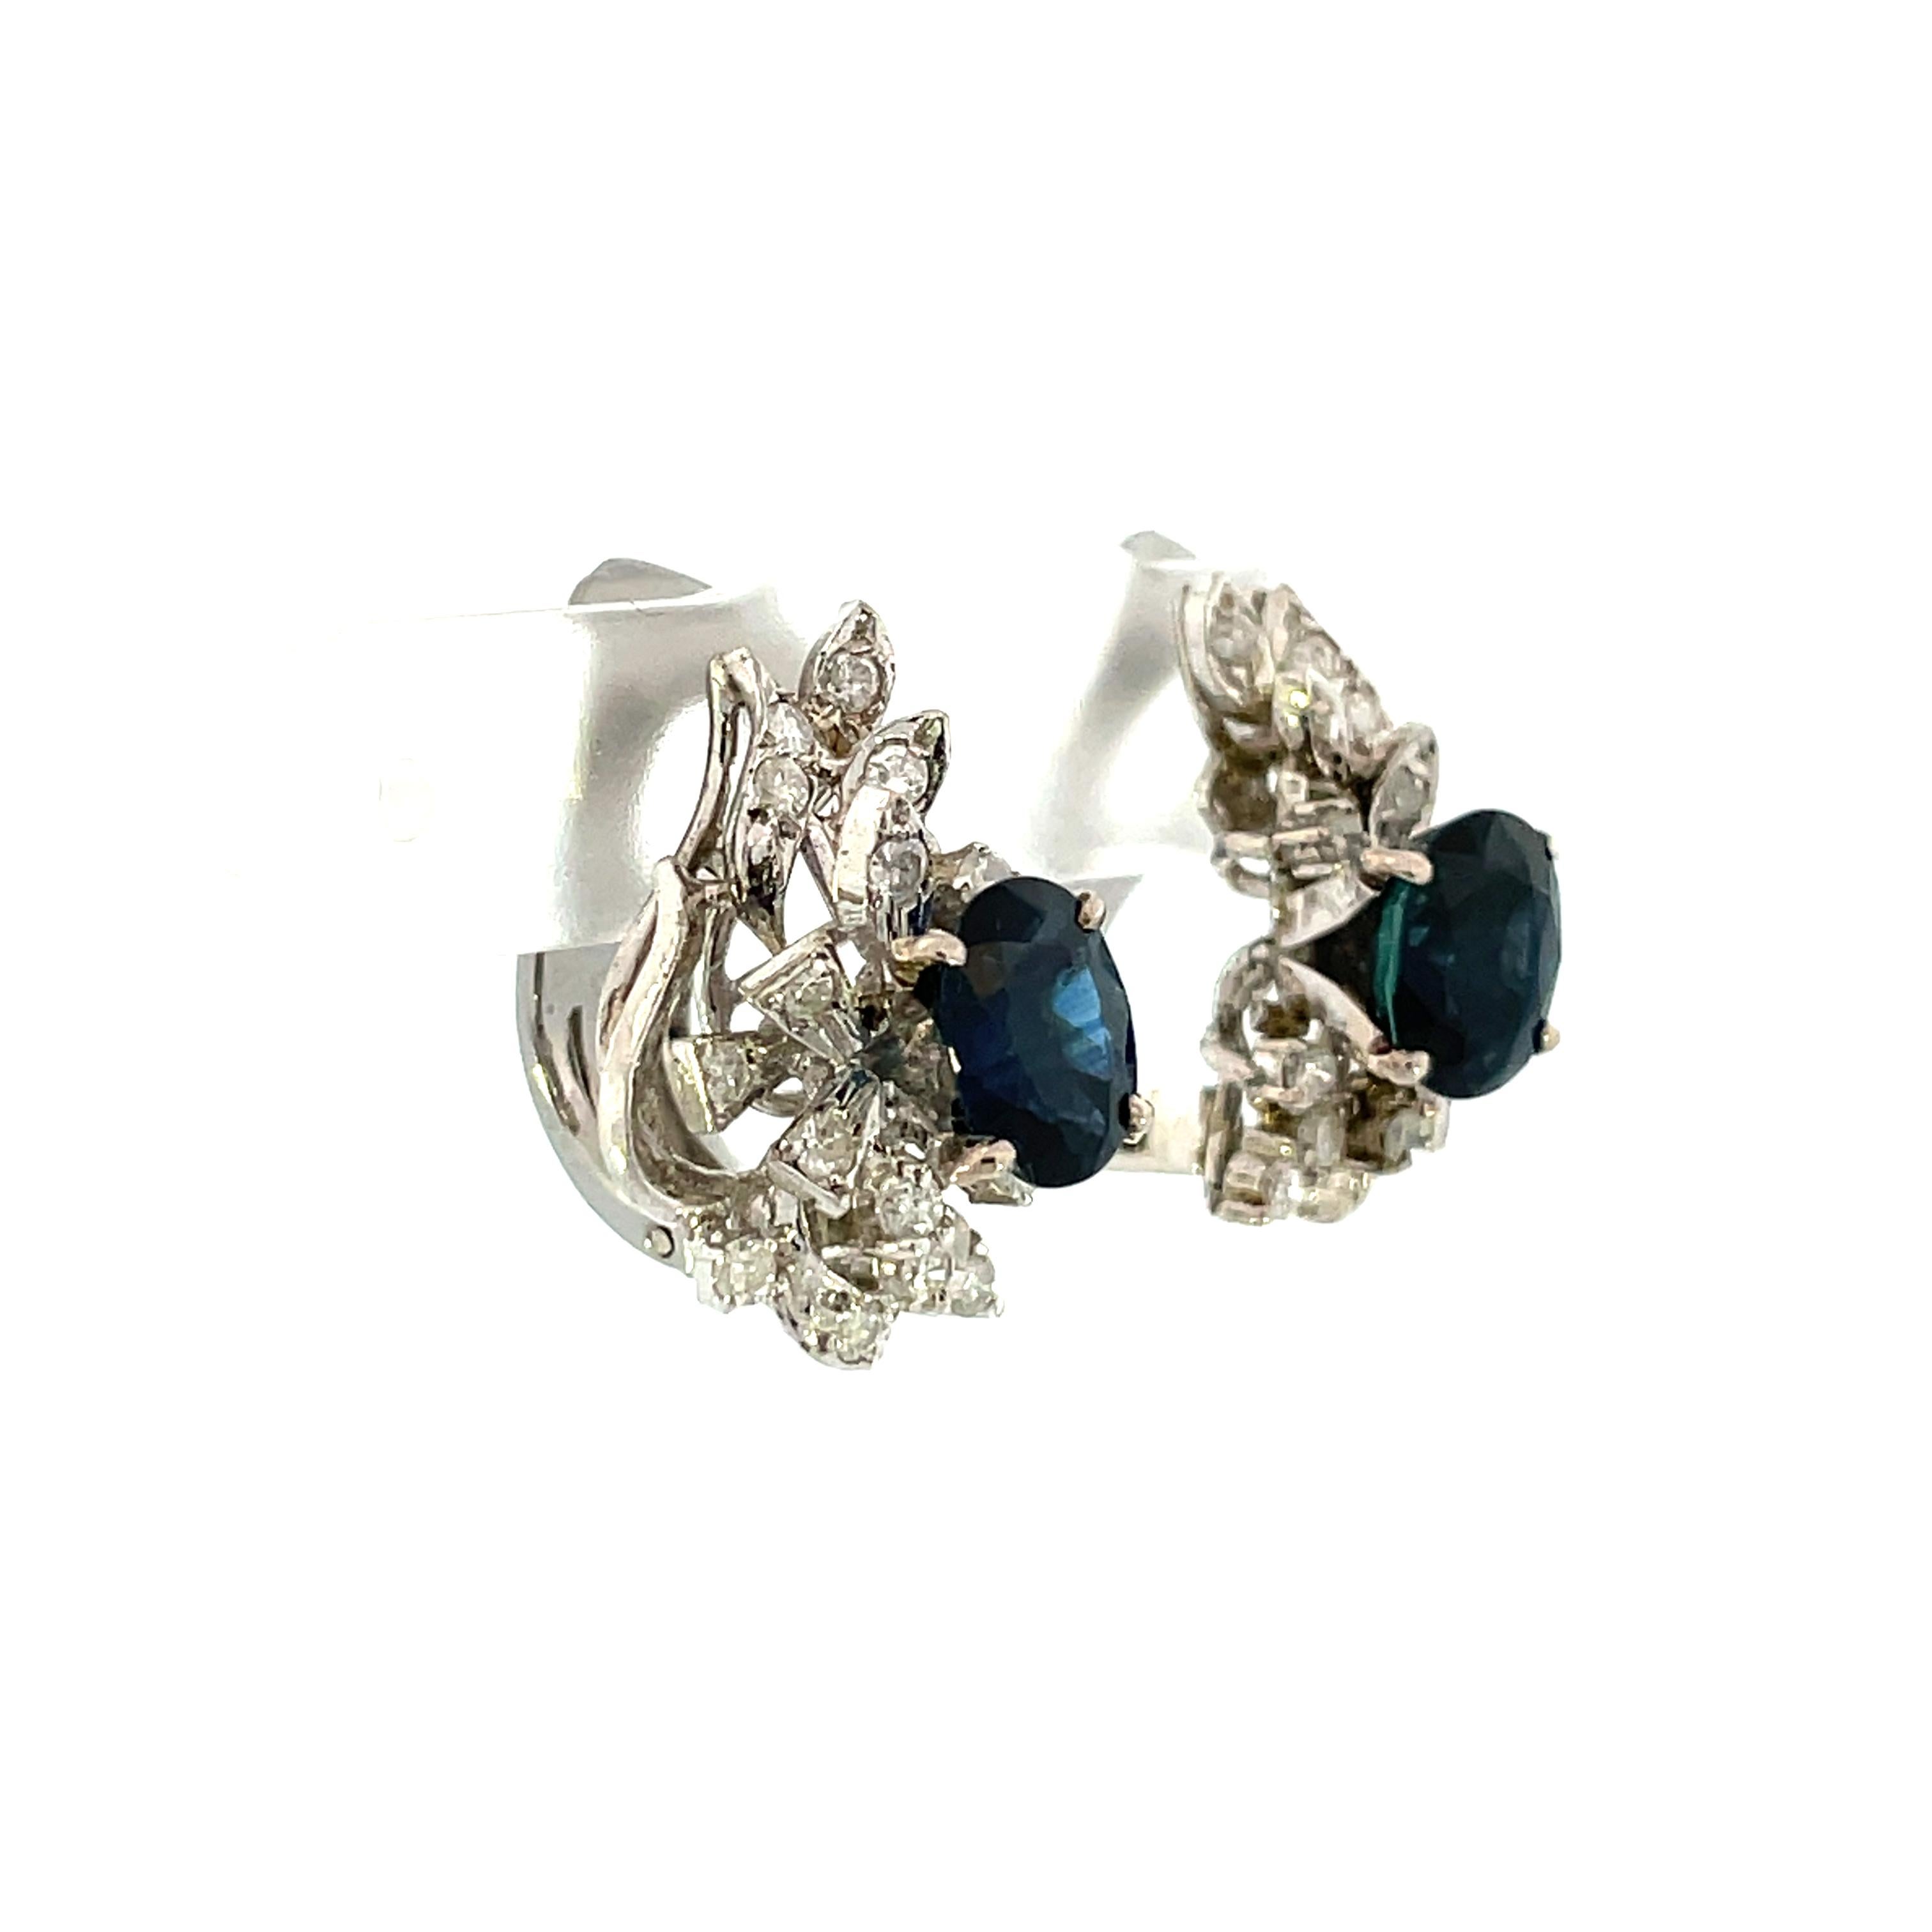 This midway retro pair of 1950s platinum and diamond earrings starring medium blue sapphires provide a secure and comfortable fit for those without pierced ears. This pair includes .32 tw of G color SI1 clarity diamonds, multi-layered within the